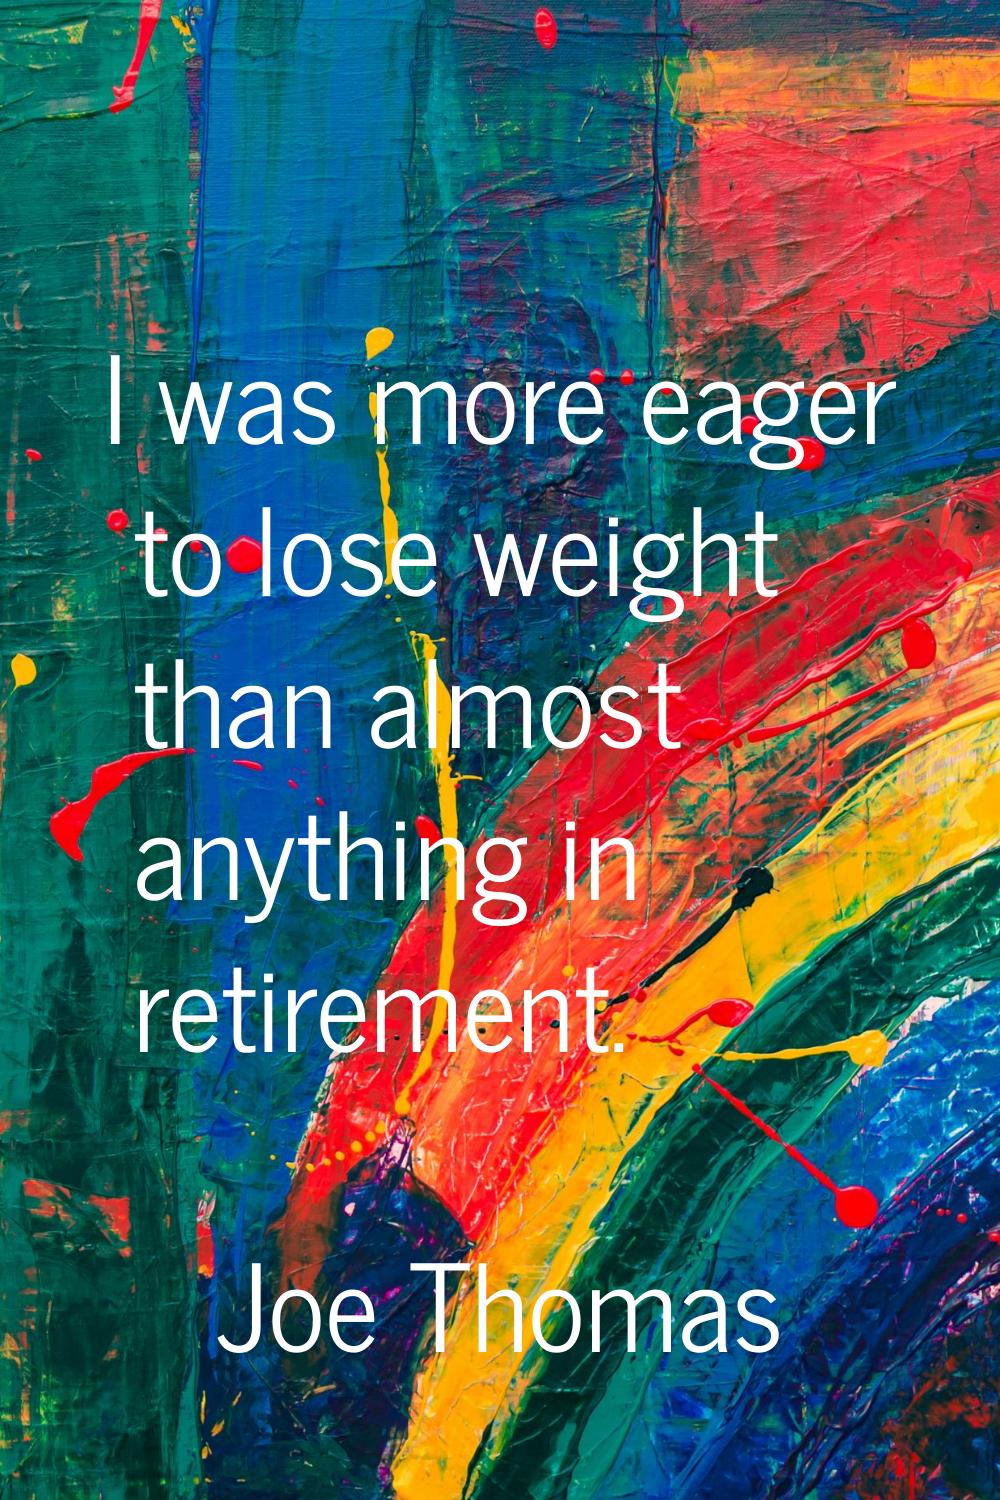 I was more eager to lose weight than almost anything in retirement.